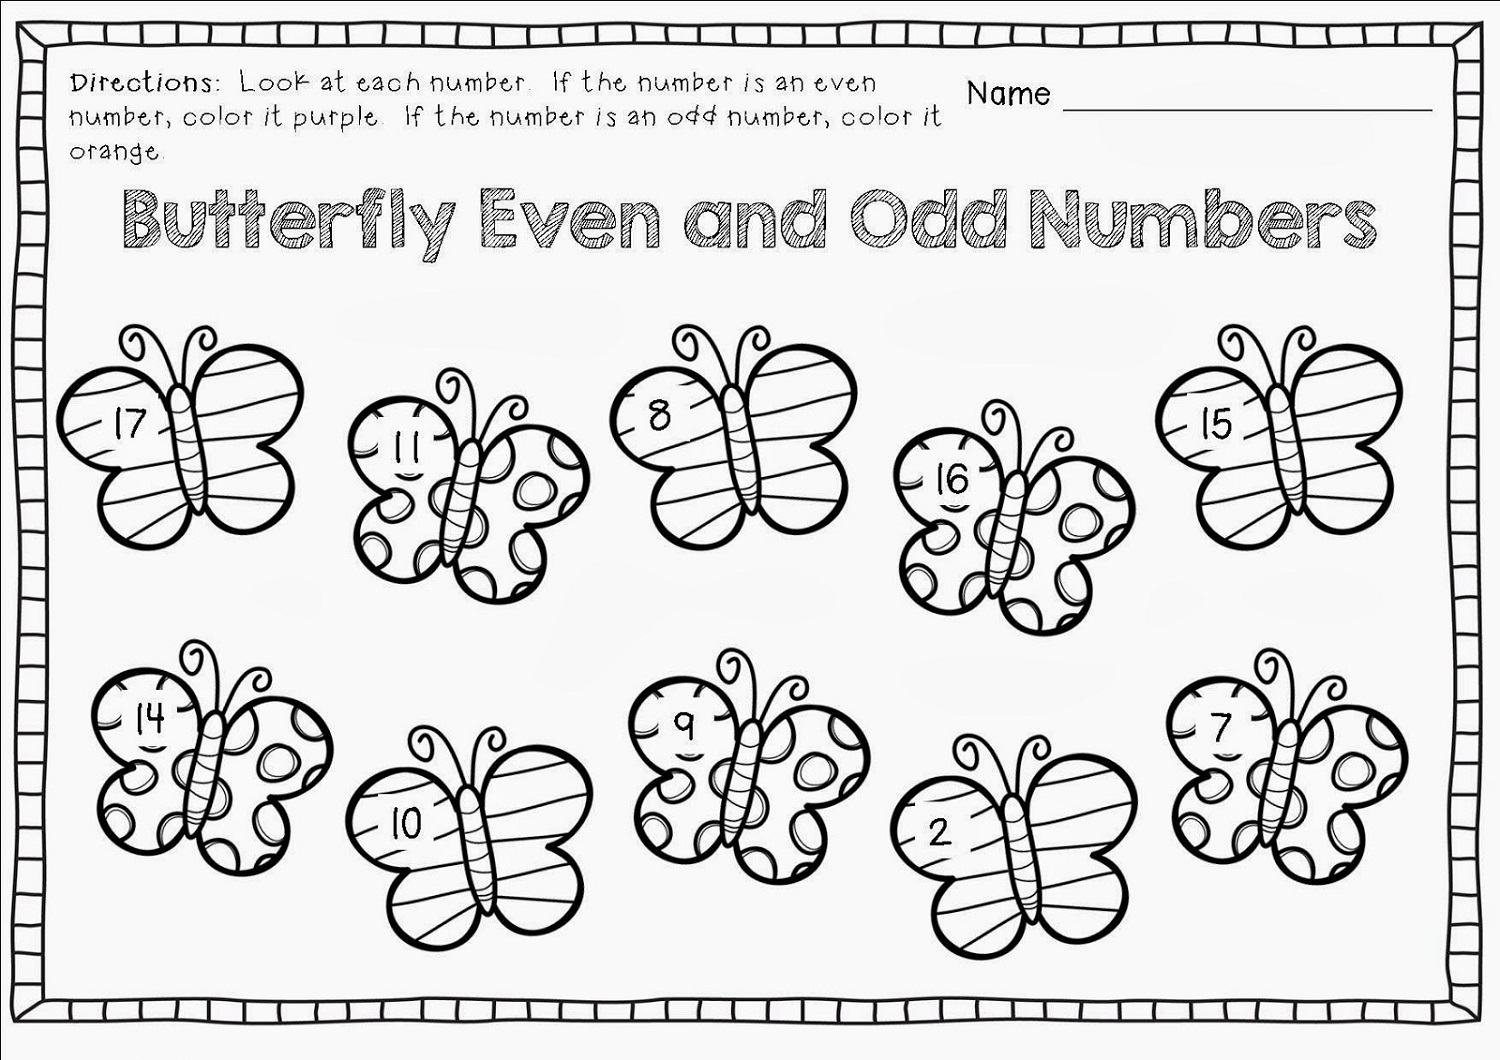 Free Odd And Even Worksheets Activity Shelter